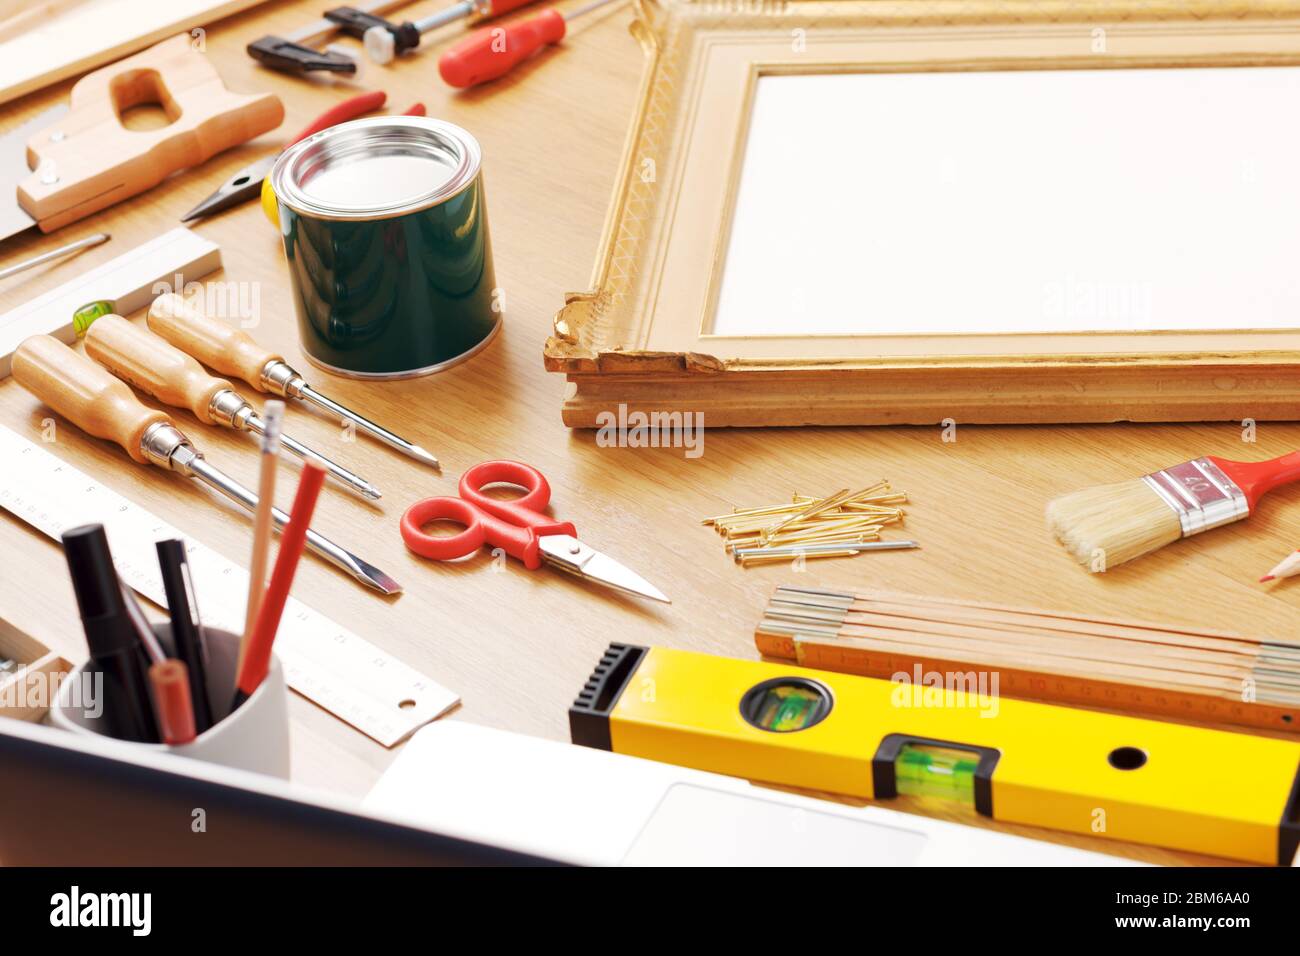 Decorator work table with varnish bucket, DIY tools and wooden frame, hobby and craft concept Stock Photo